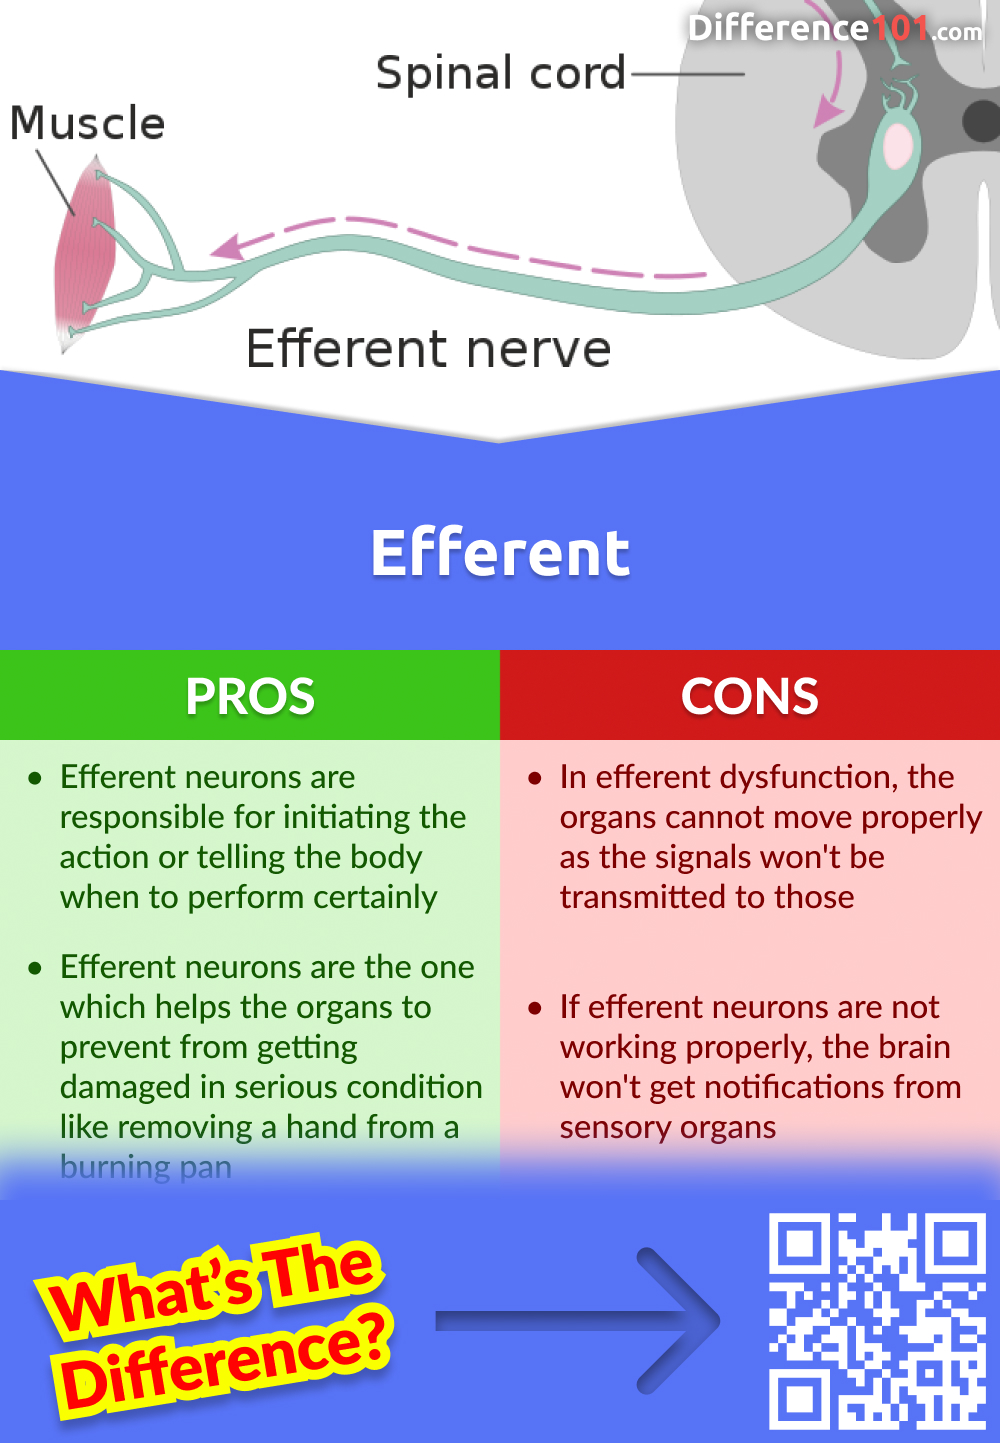 Efferent Pros and Cons